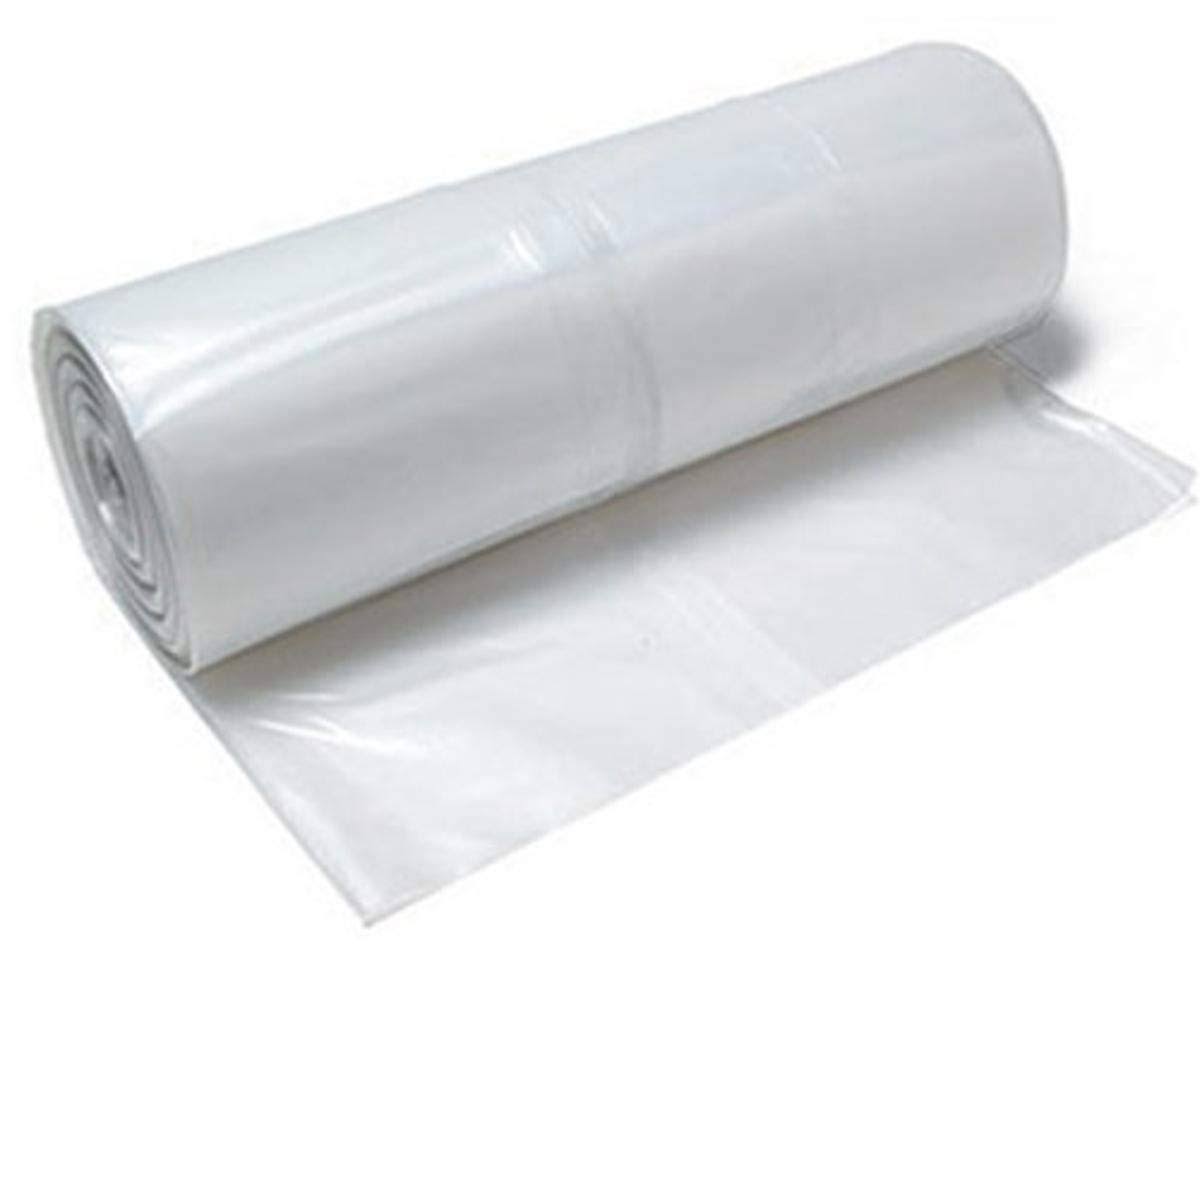 TRM 212C 12' x 200' 2 Mil All Weather Plastic Sheeting Clear Visqueen, 1-Roll